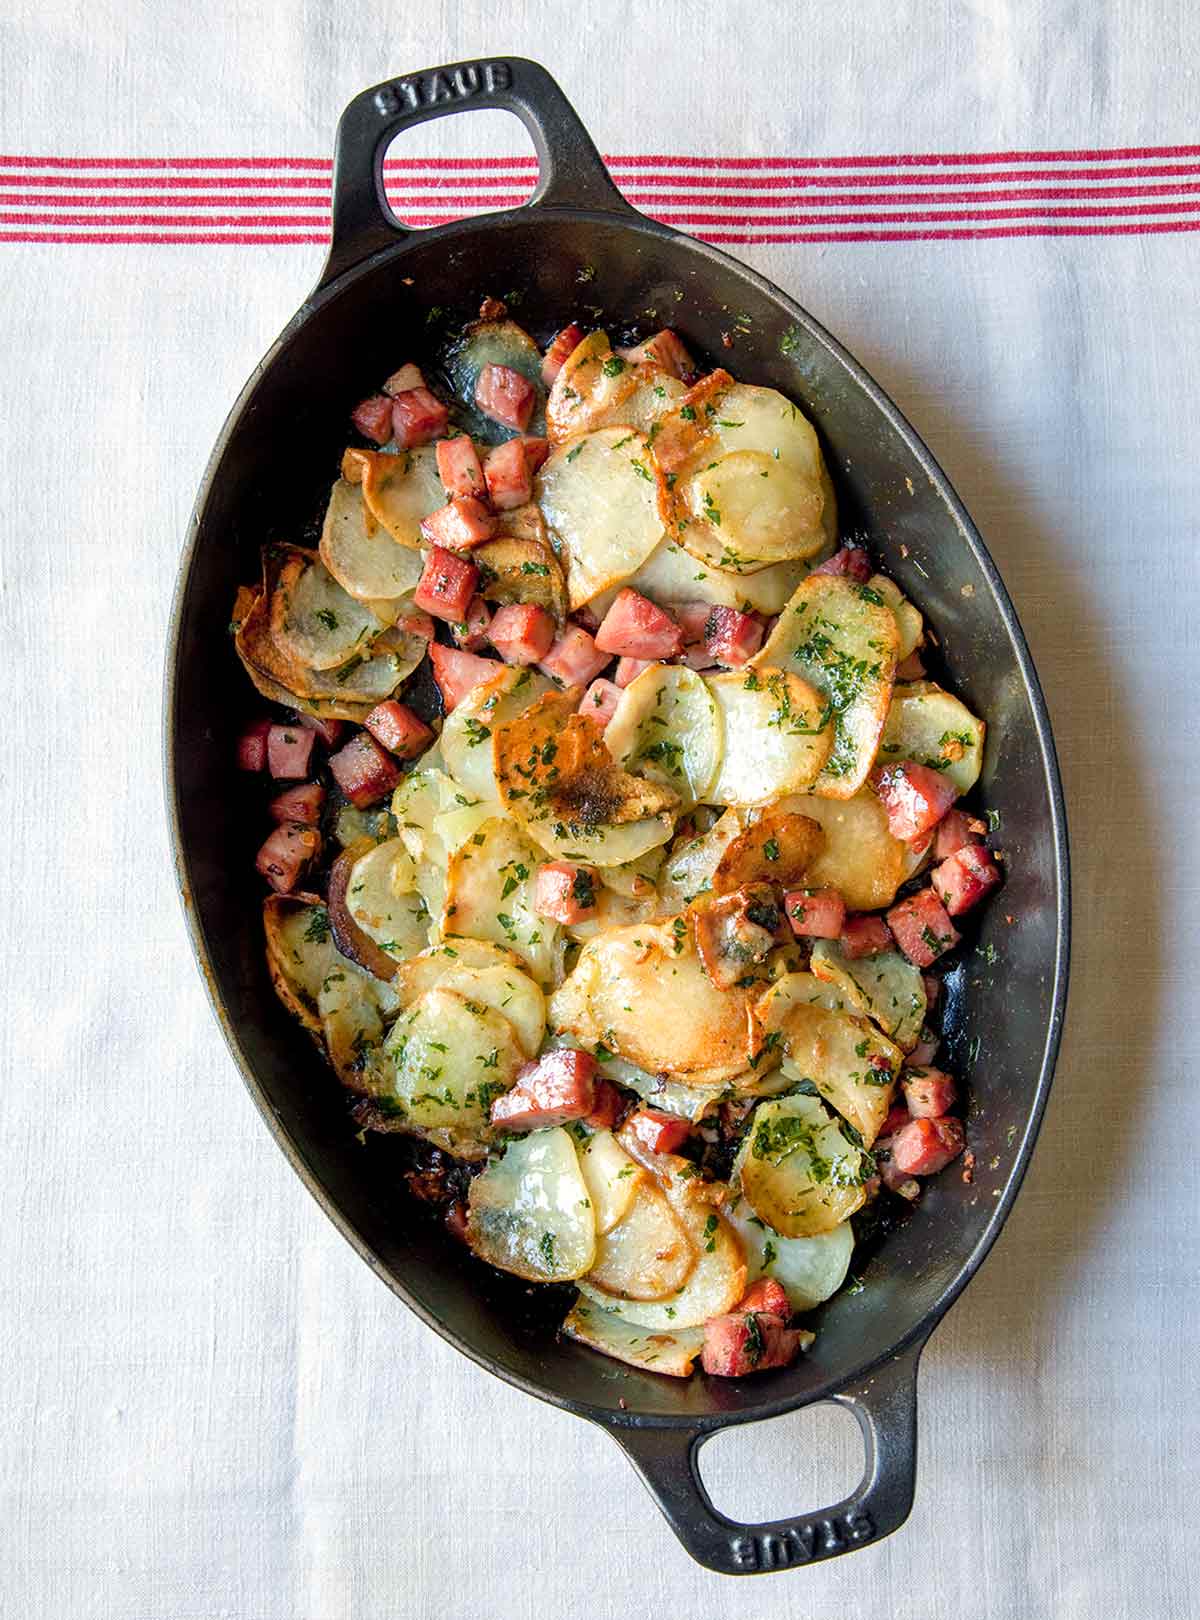 An oval baking dish filled with sliced potatoes, cubed ham, and chopped herbs.